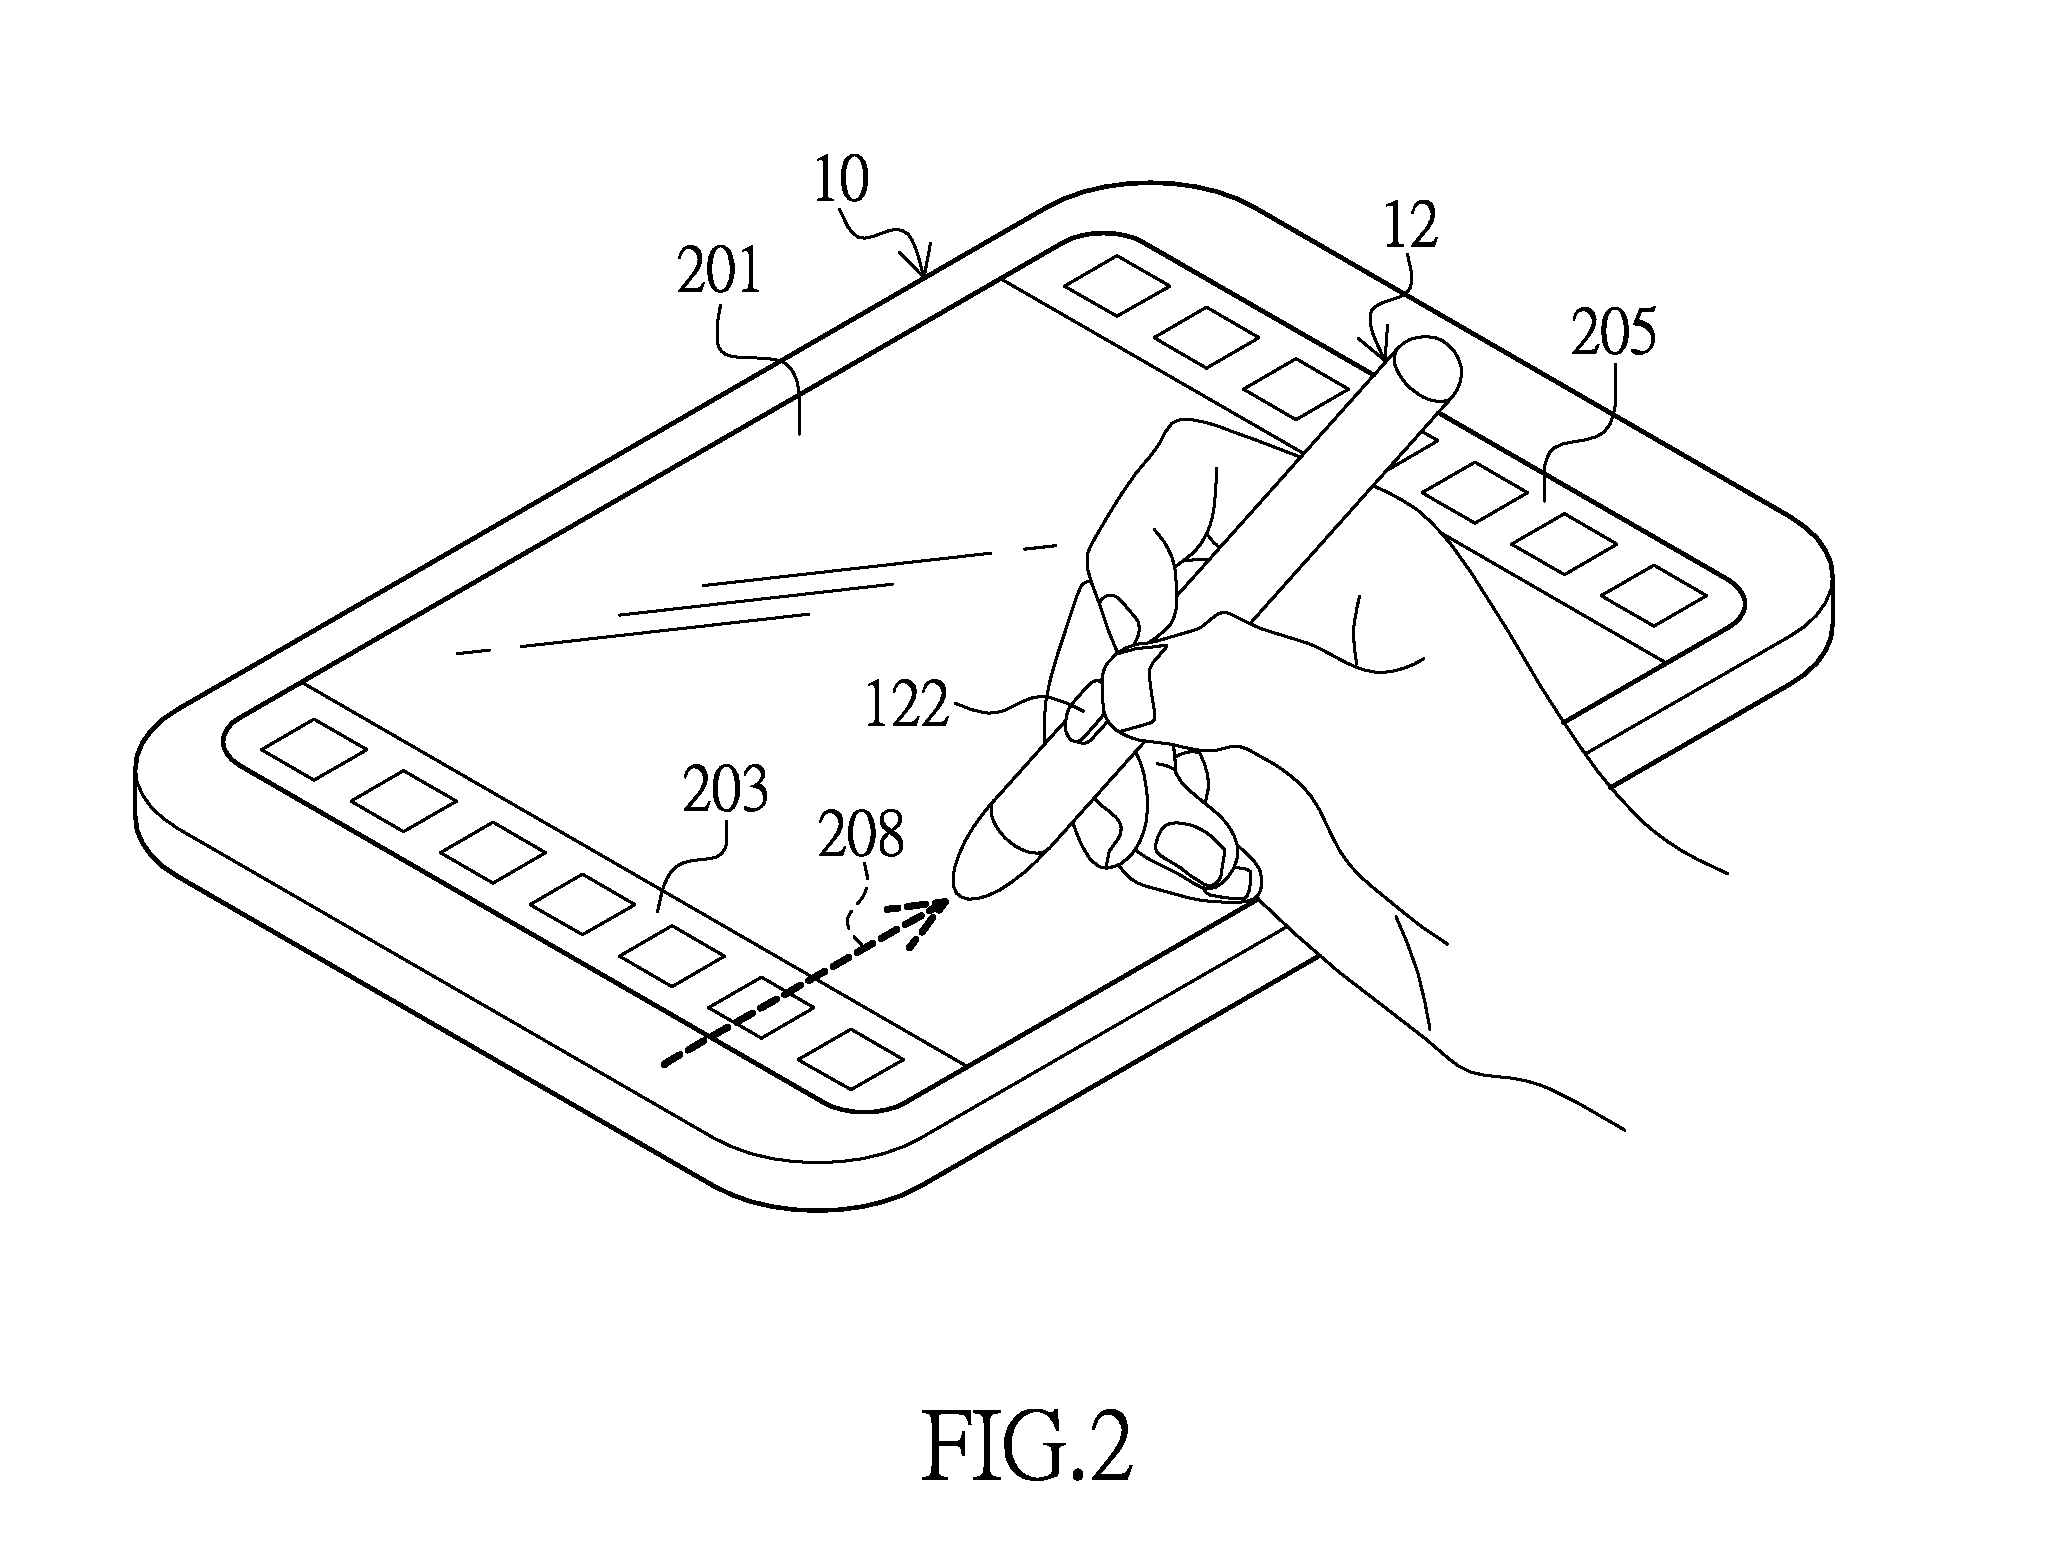 Touch-sensitive panel apparatus, control circuit and method for scanning touch event